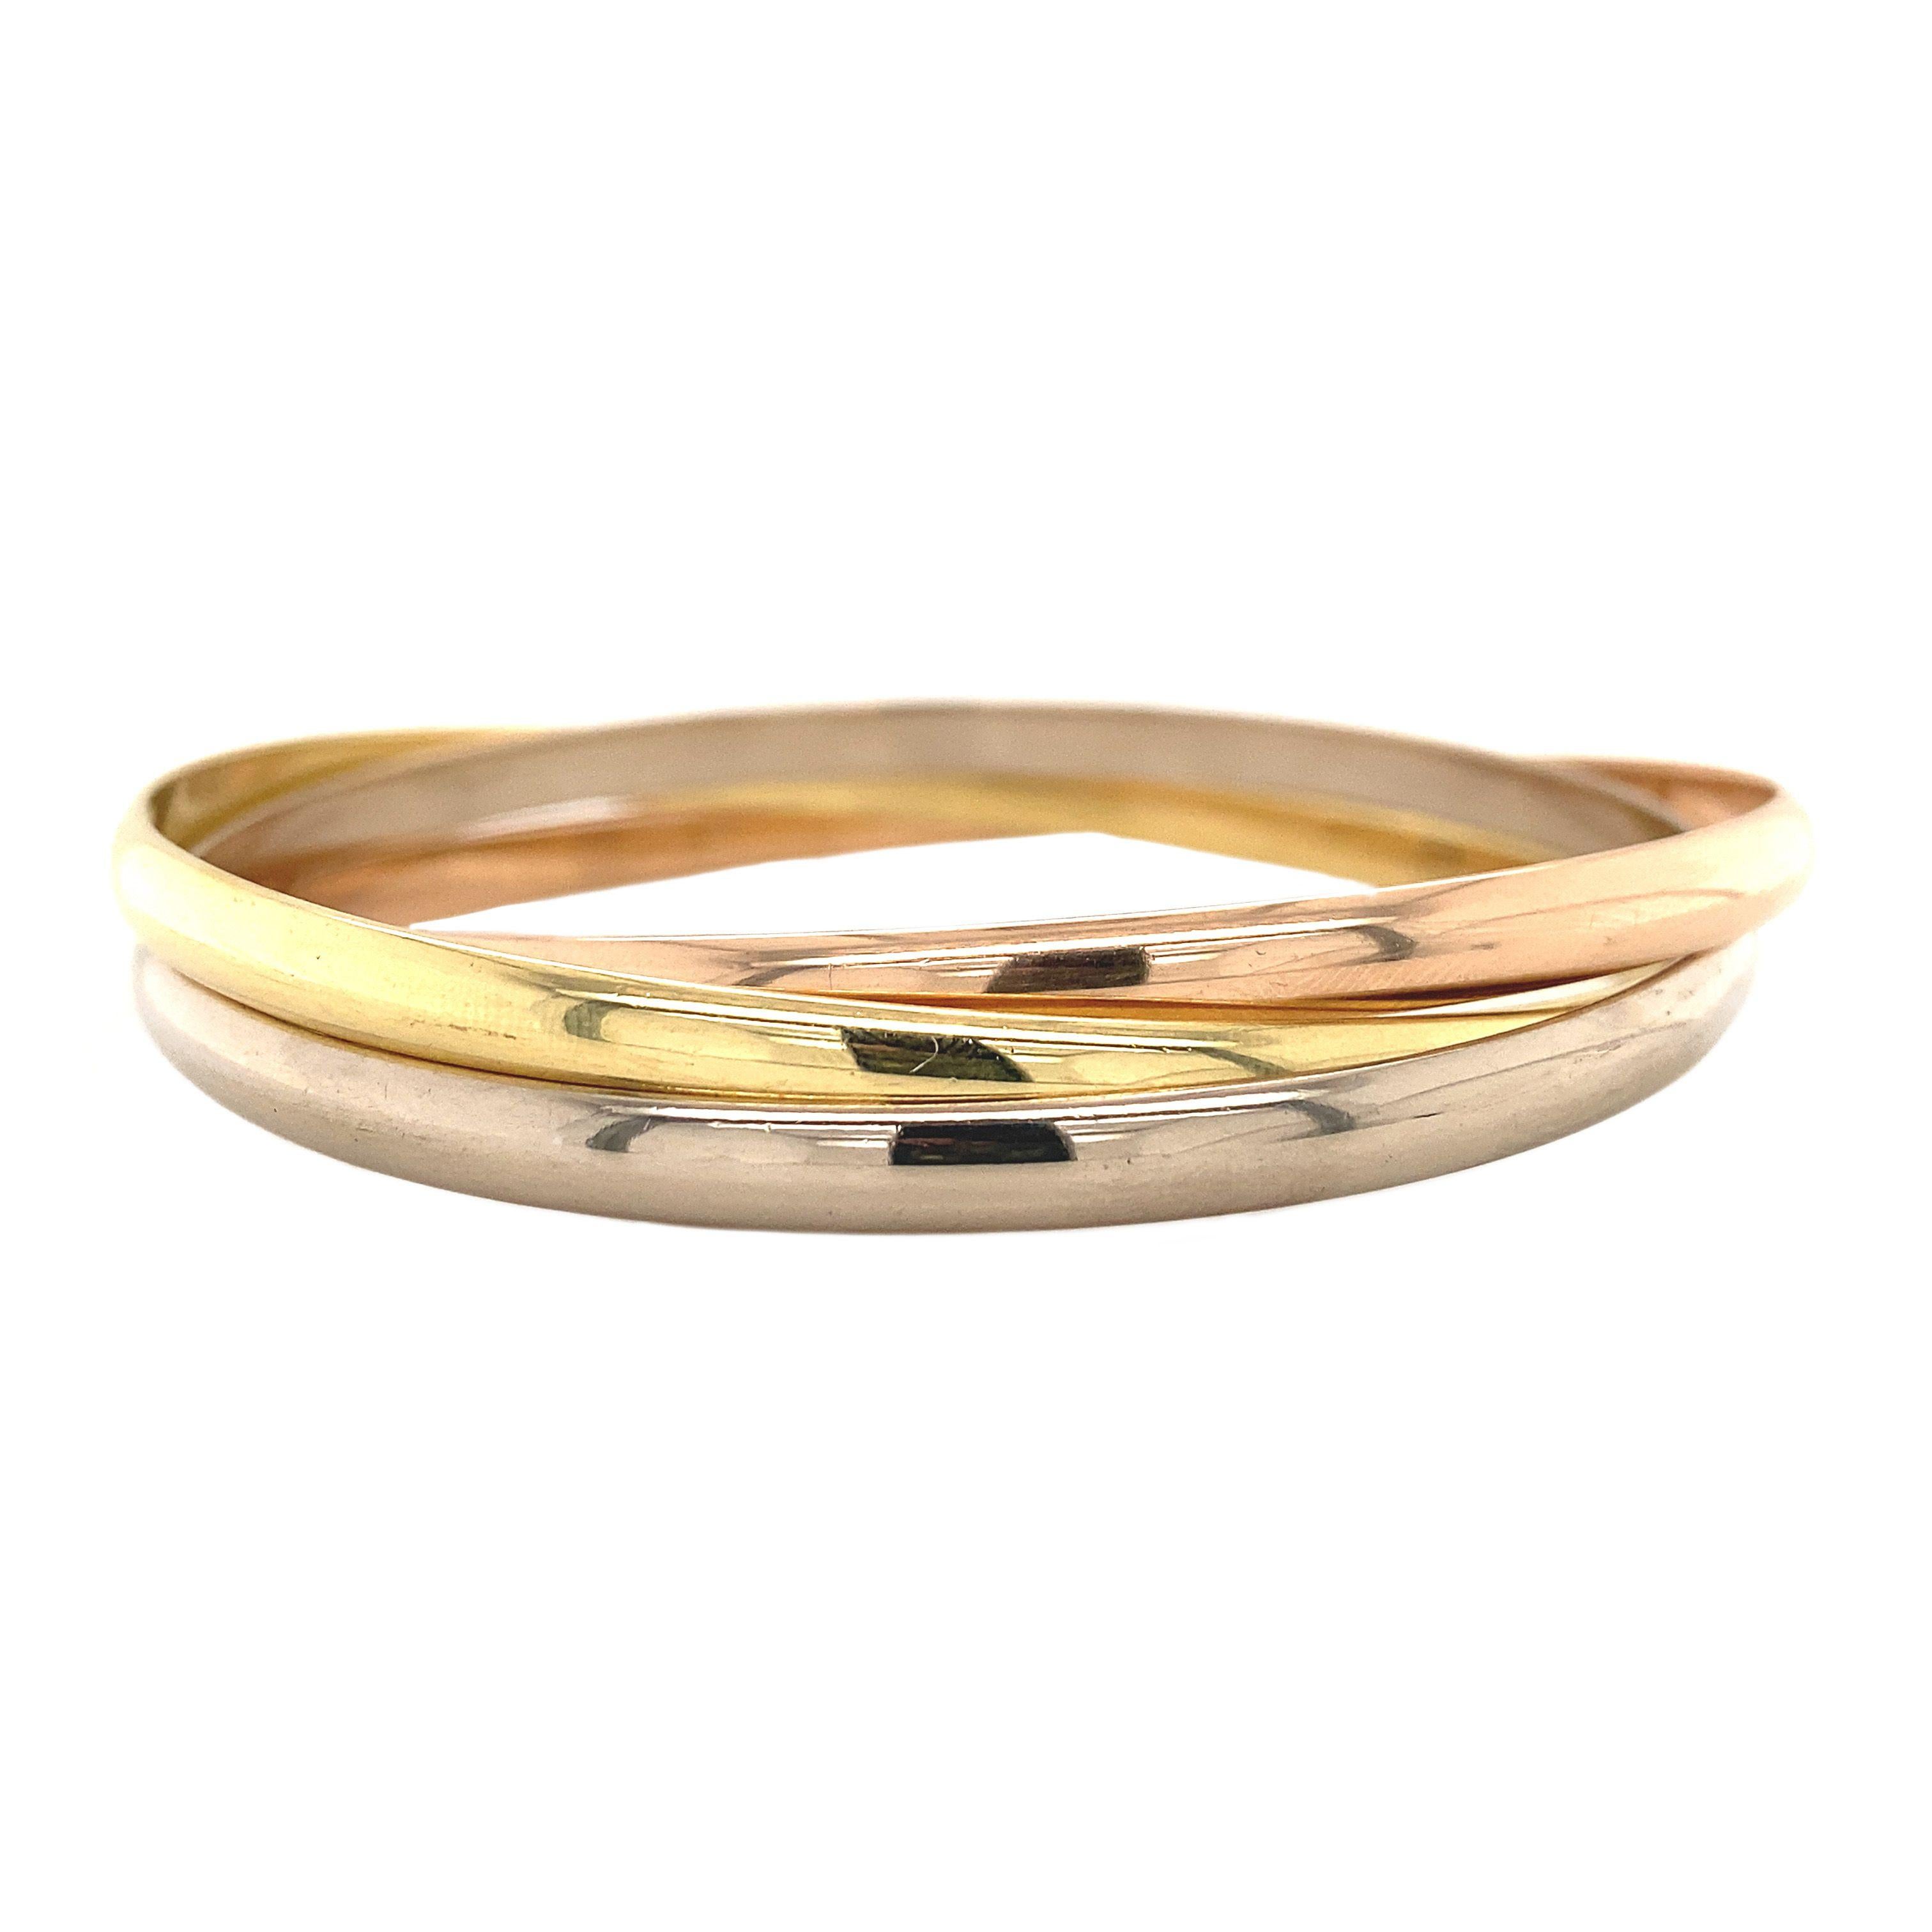 This tricolour gold trinity bracelet is by the brand Cartier from the year 1997. The bracelet consists of a 18 carat white gold, yellow gold and rose gold band. The bracelet comes with an original box. 

Brand: Cartier
Material: Tricolour gold